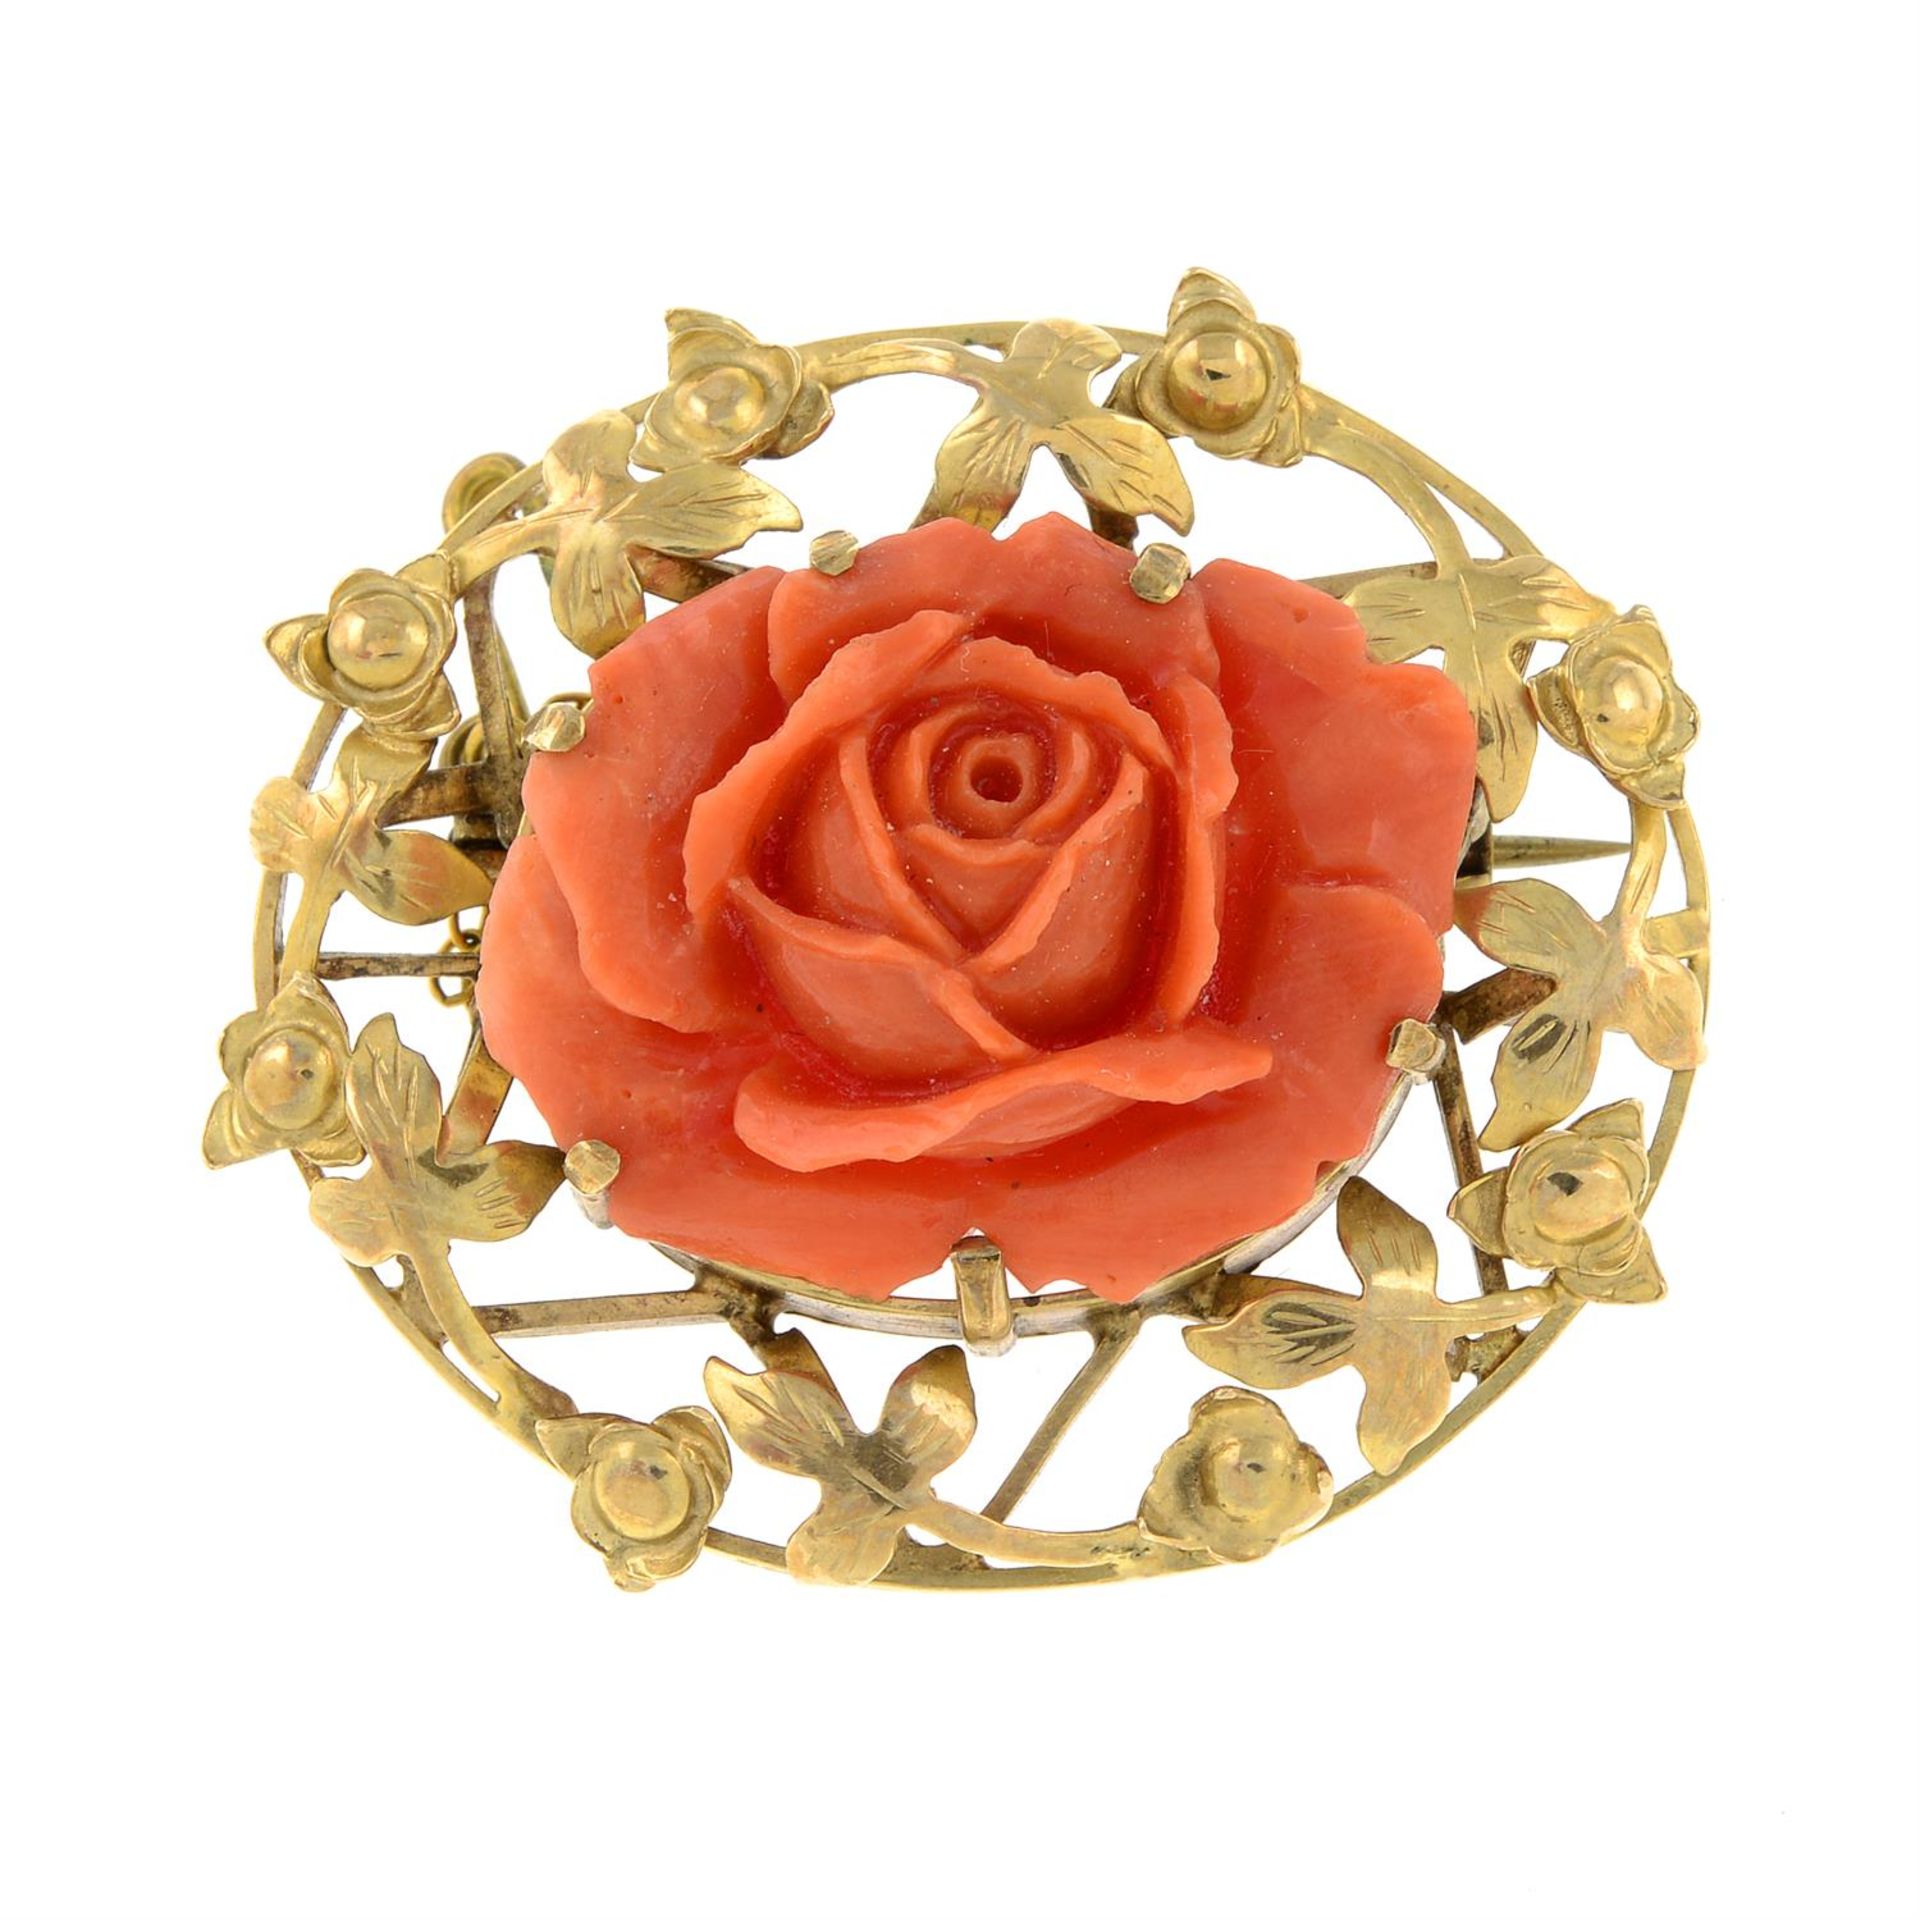 A 1960s carved coral rose brooch.